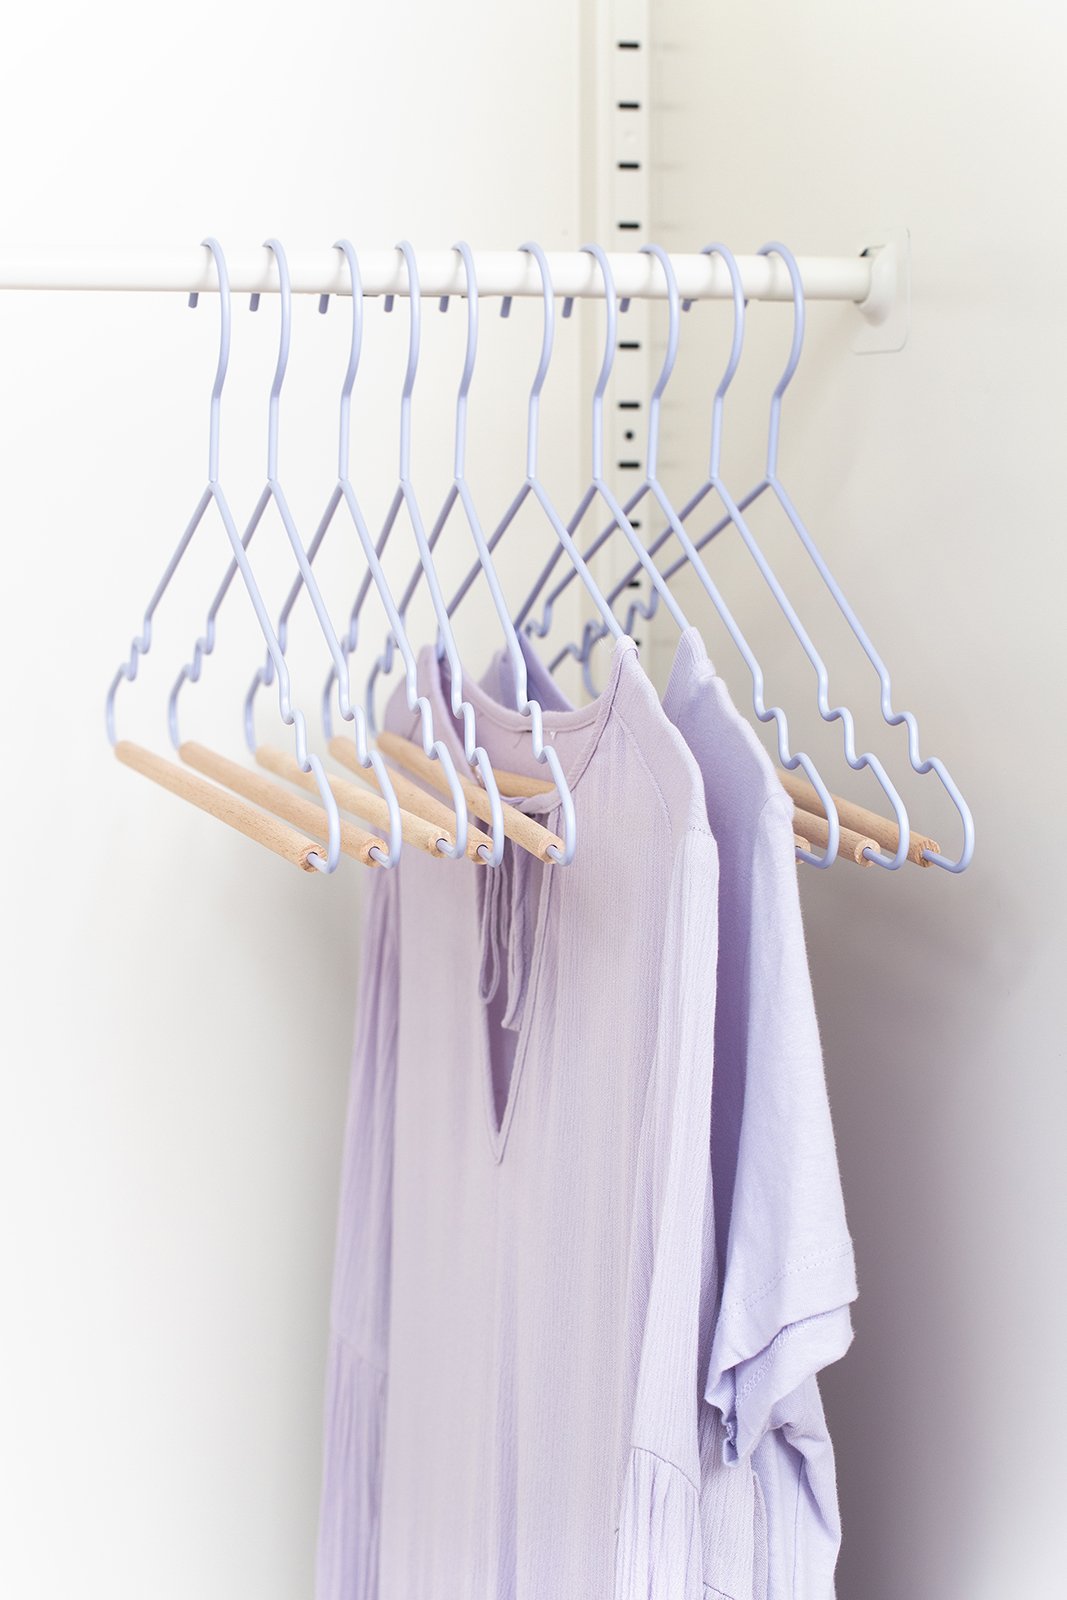 Mustard Made Adult Top Hangers in Lilac Pack of 10